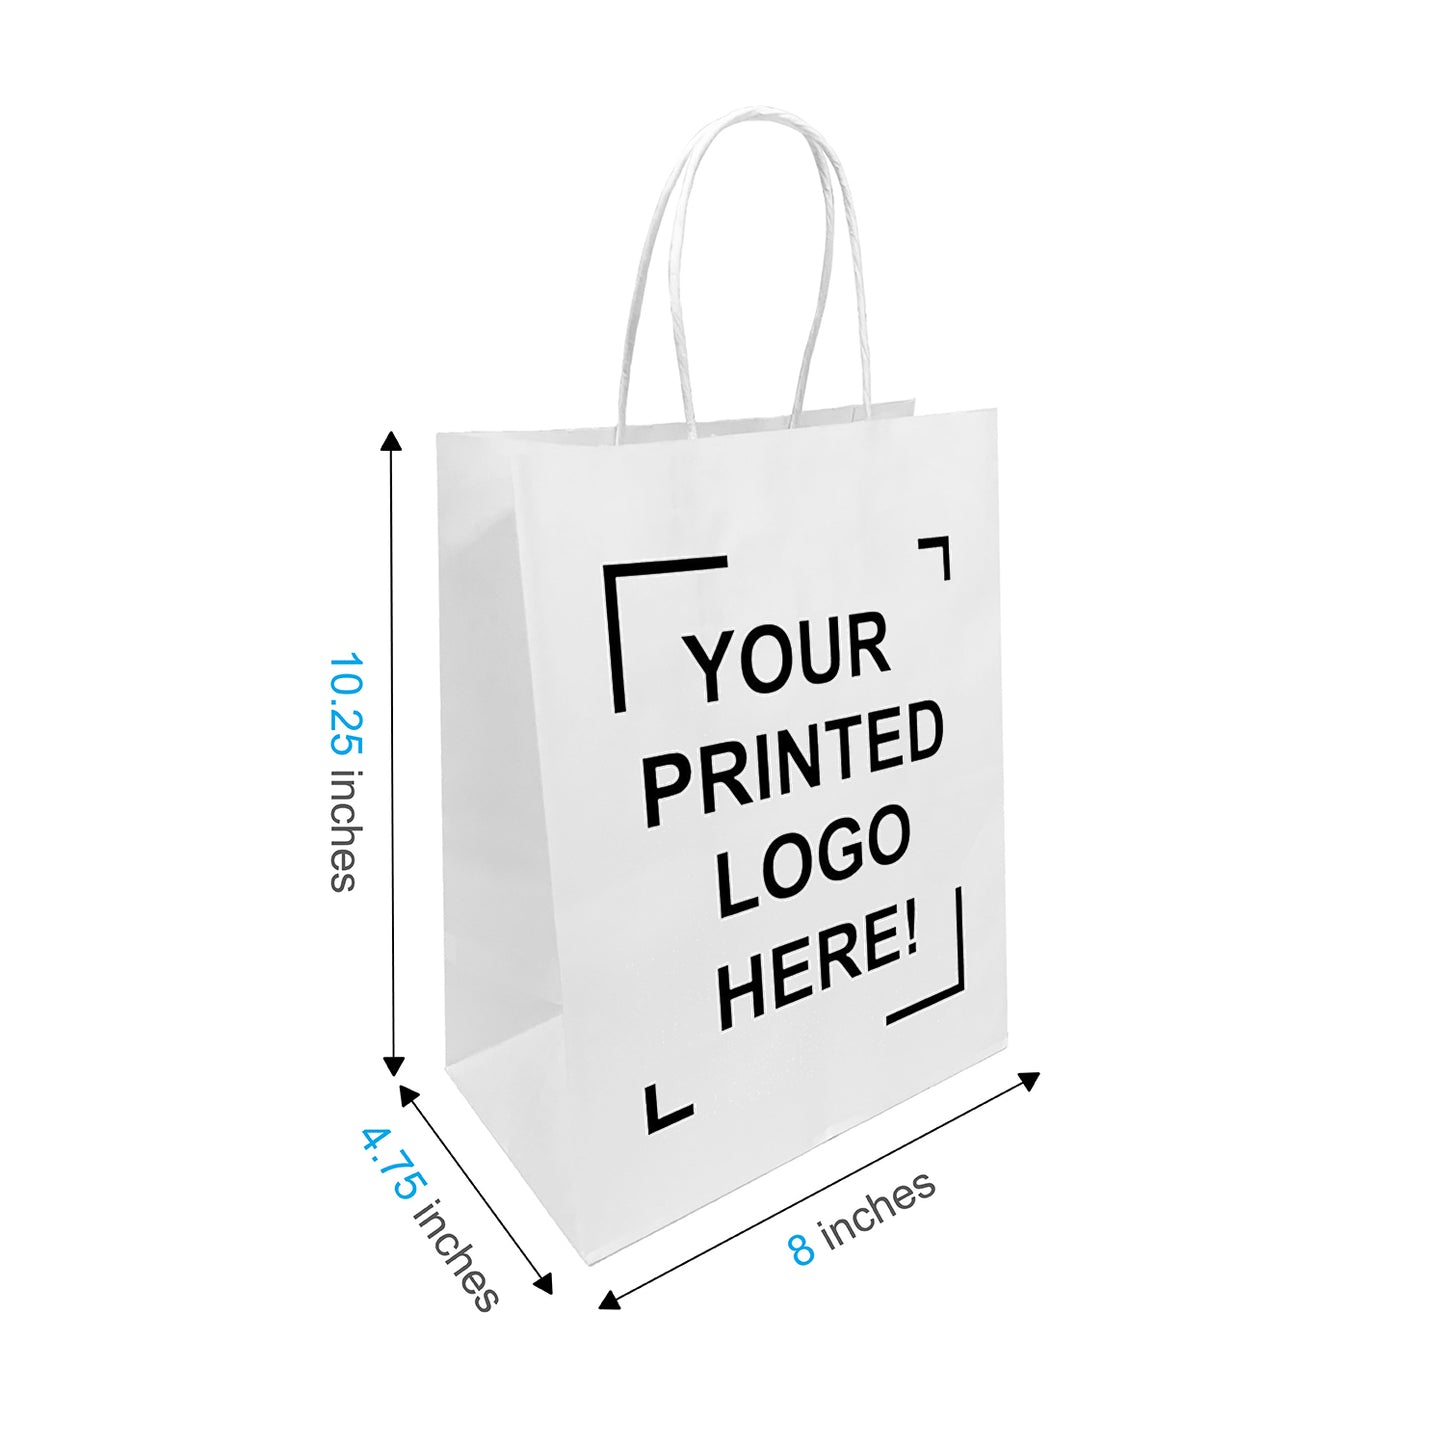 250 Pcs, Cub, 8x4.75x10.25 inches, White Kraft Paper Bags, with Twisted Handle, Full Color Custom Print